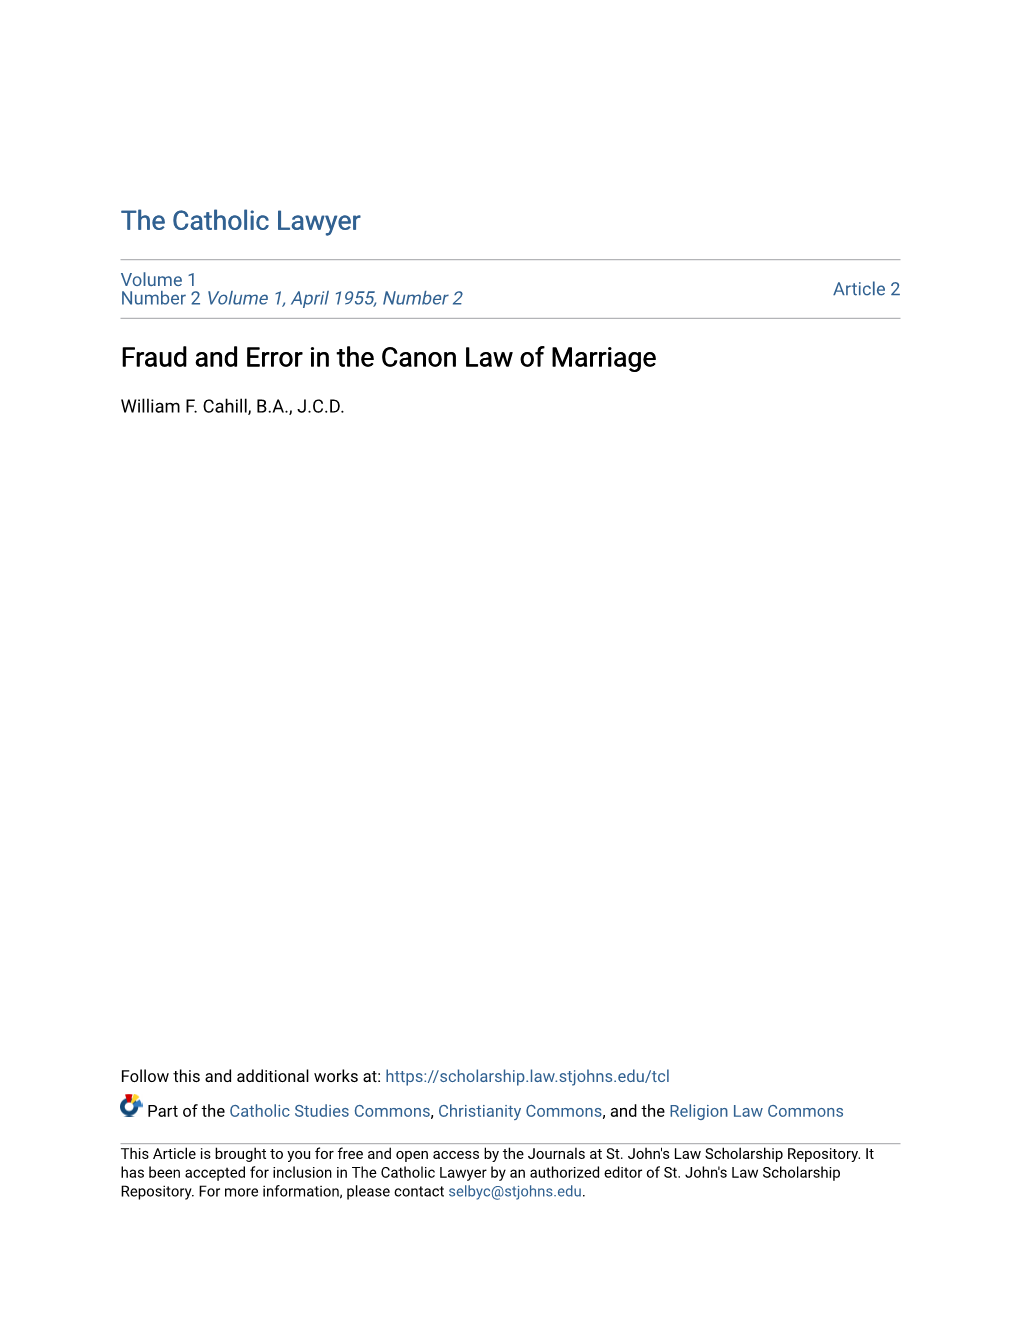 Fraud and Error in the Canon Law of Marriage